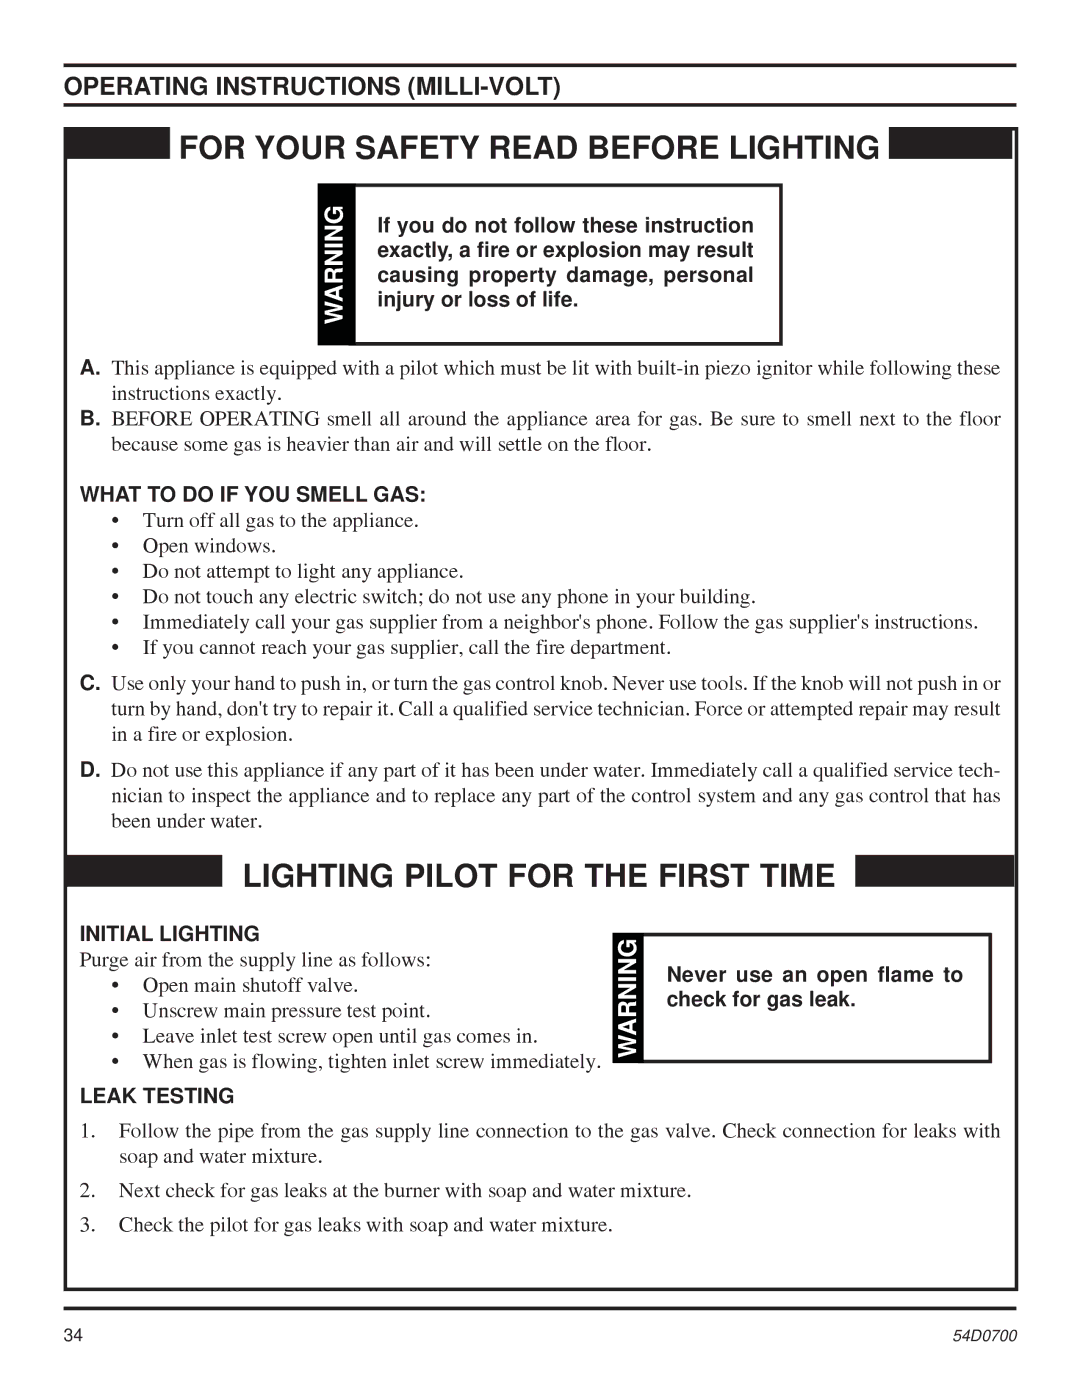 Monessen Hearth BDV300 Operating Instructions MILLI-VOLT, What to do if YOU Smell GAS, Initial Lighting, Leak Testing 